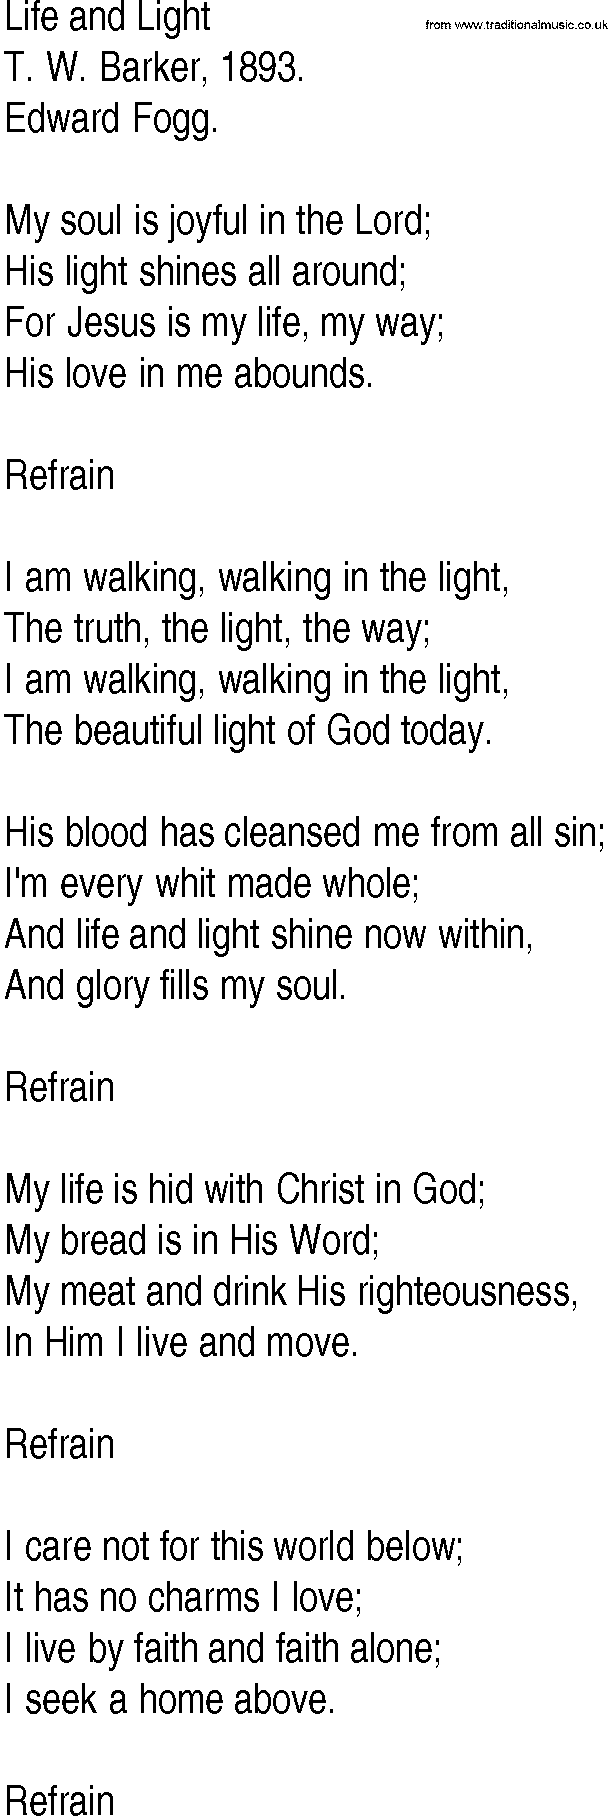 Hymn and Gospel Song: Life and Light by T W Barker lyrics